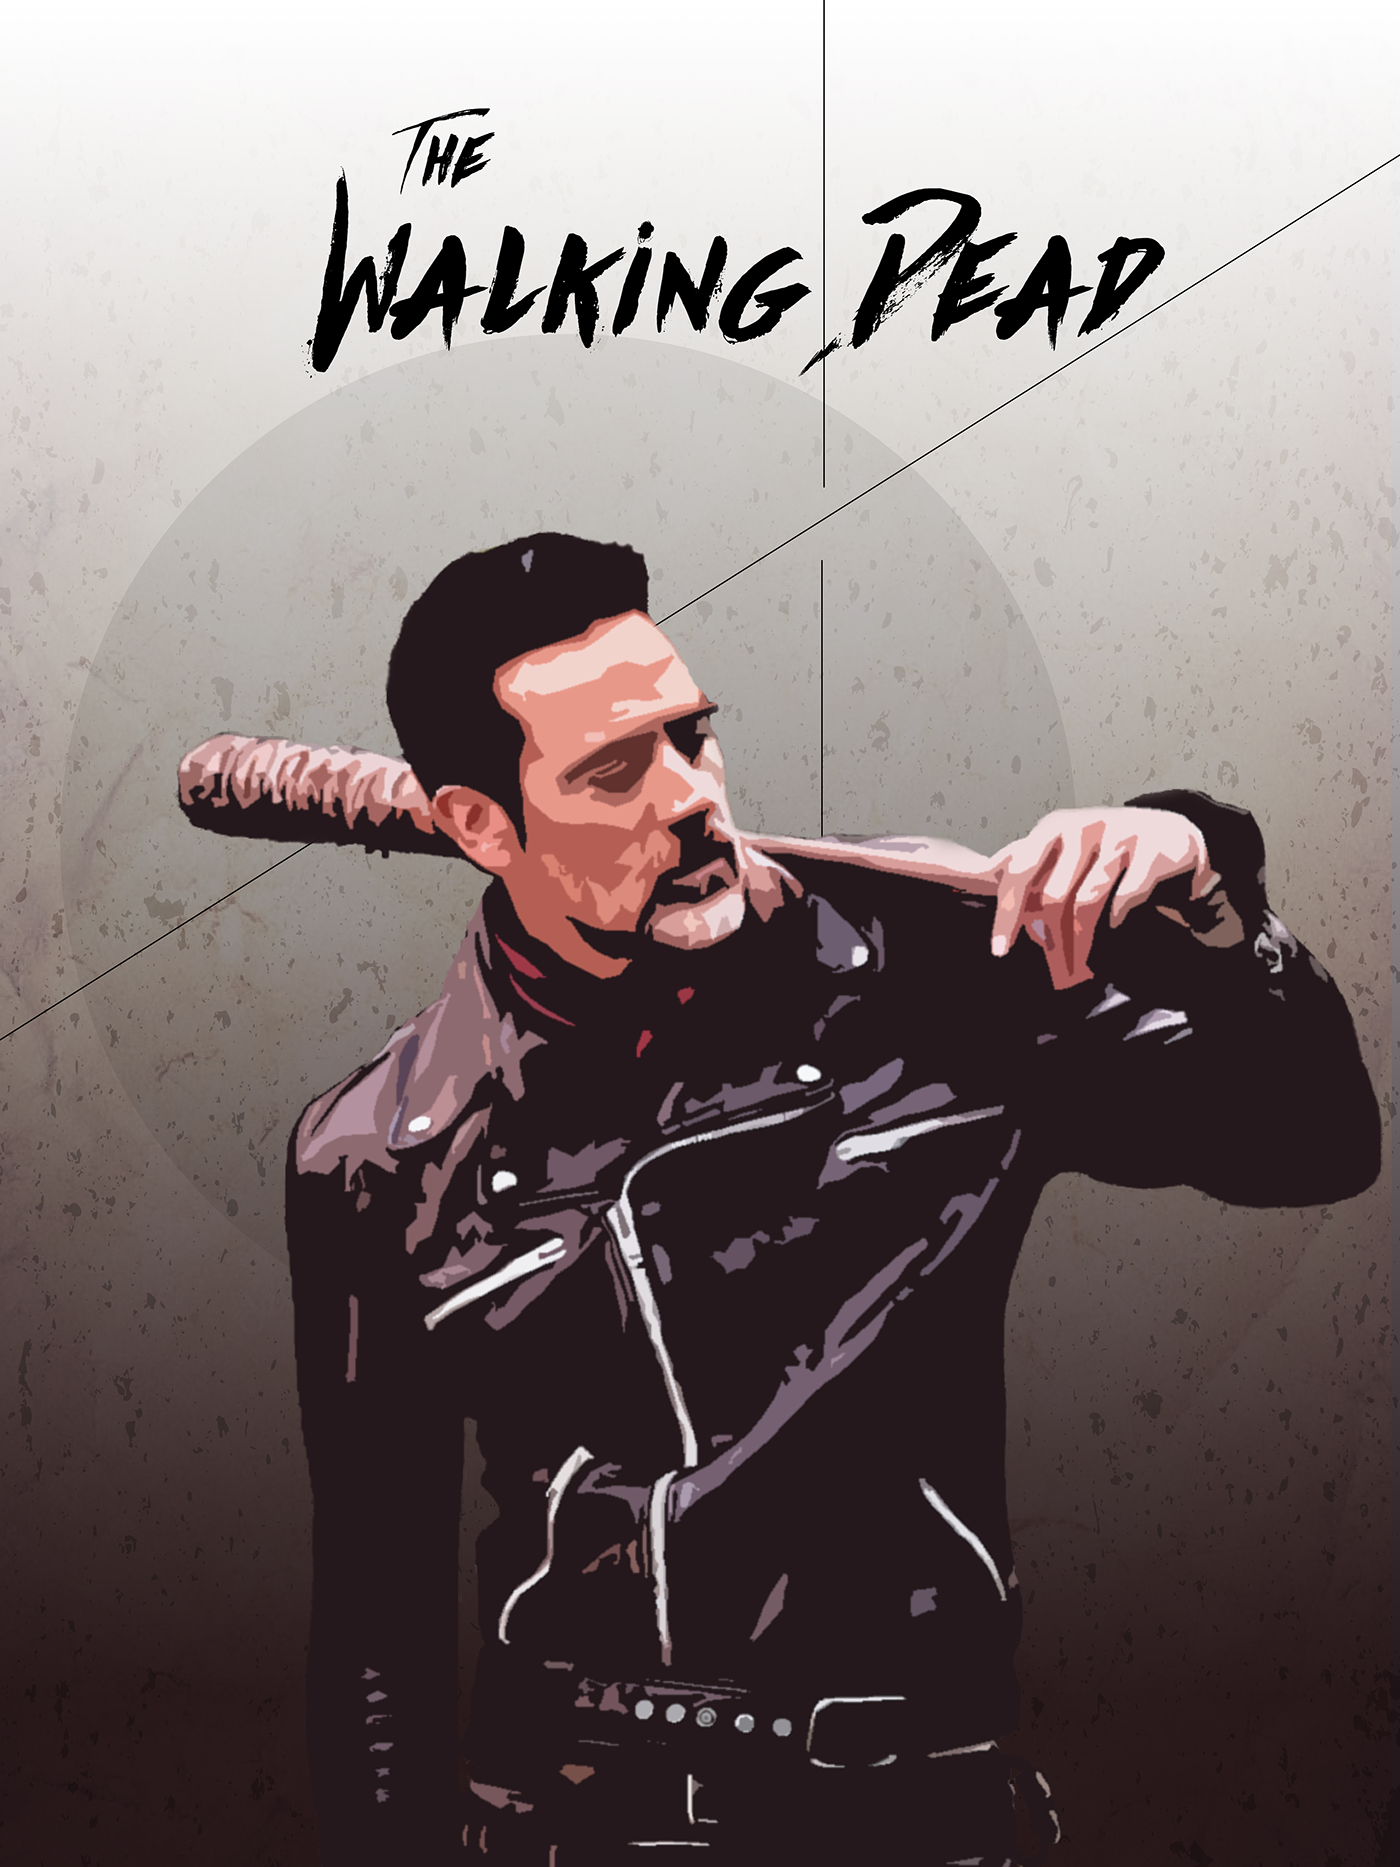 The walking Dead Graphic Desidgn poster